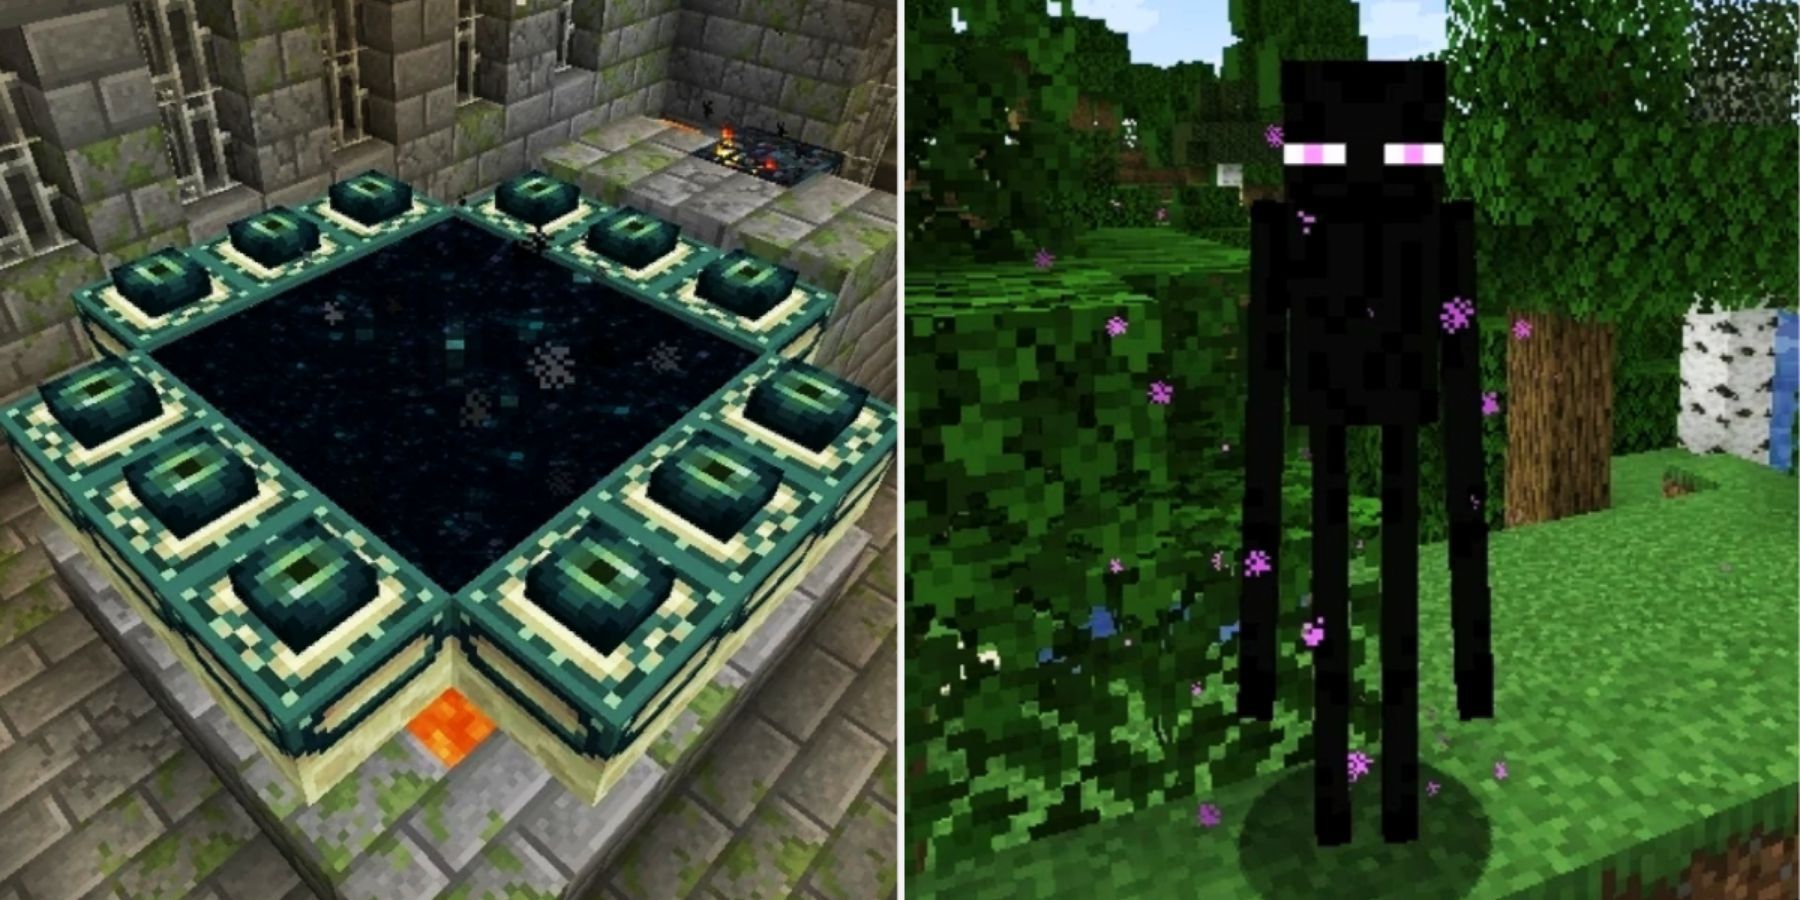 How to Respawn the Ender Dragon in Minecraft: 9 Steps